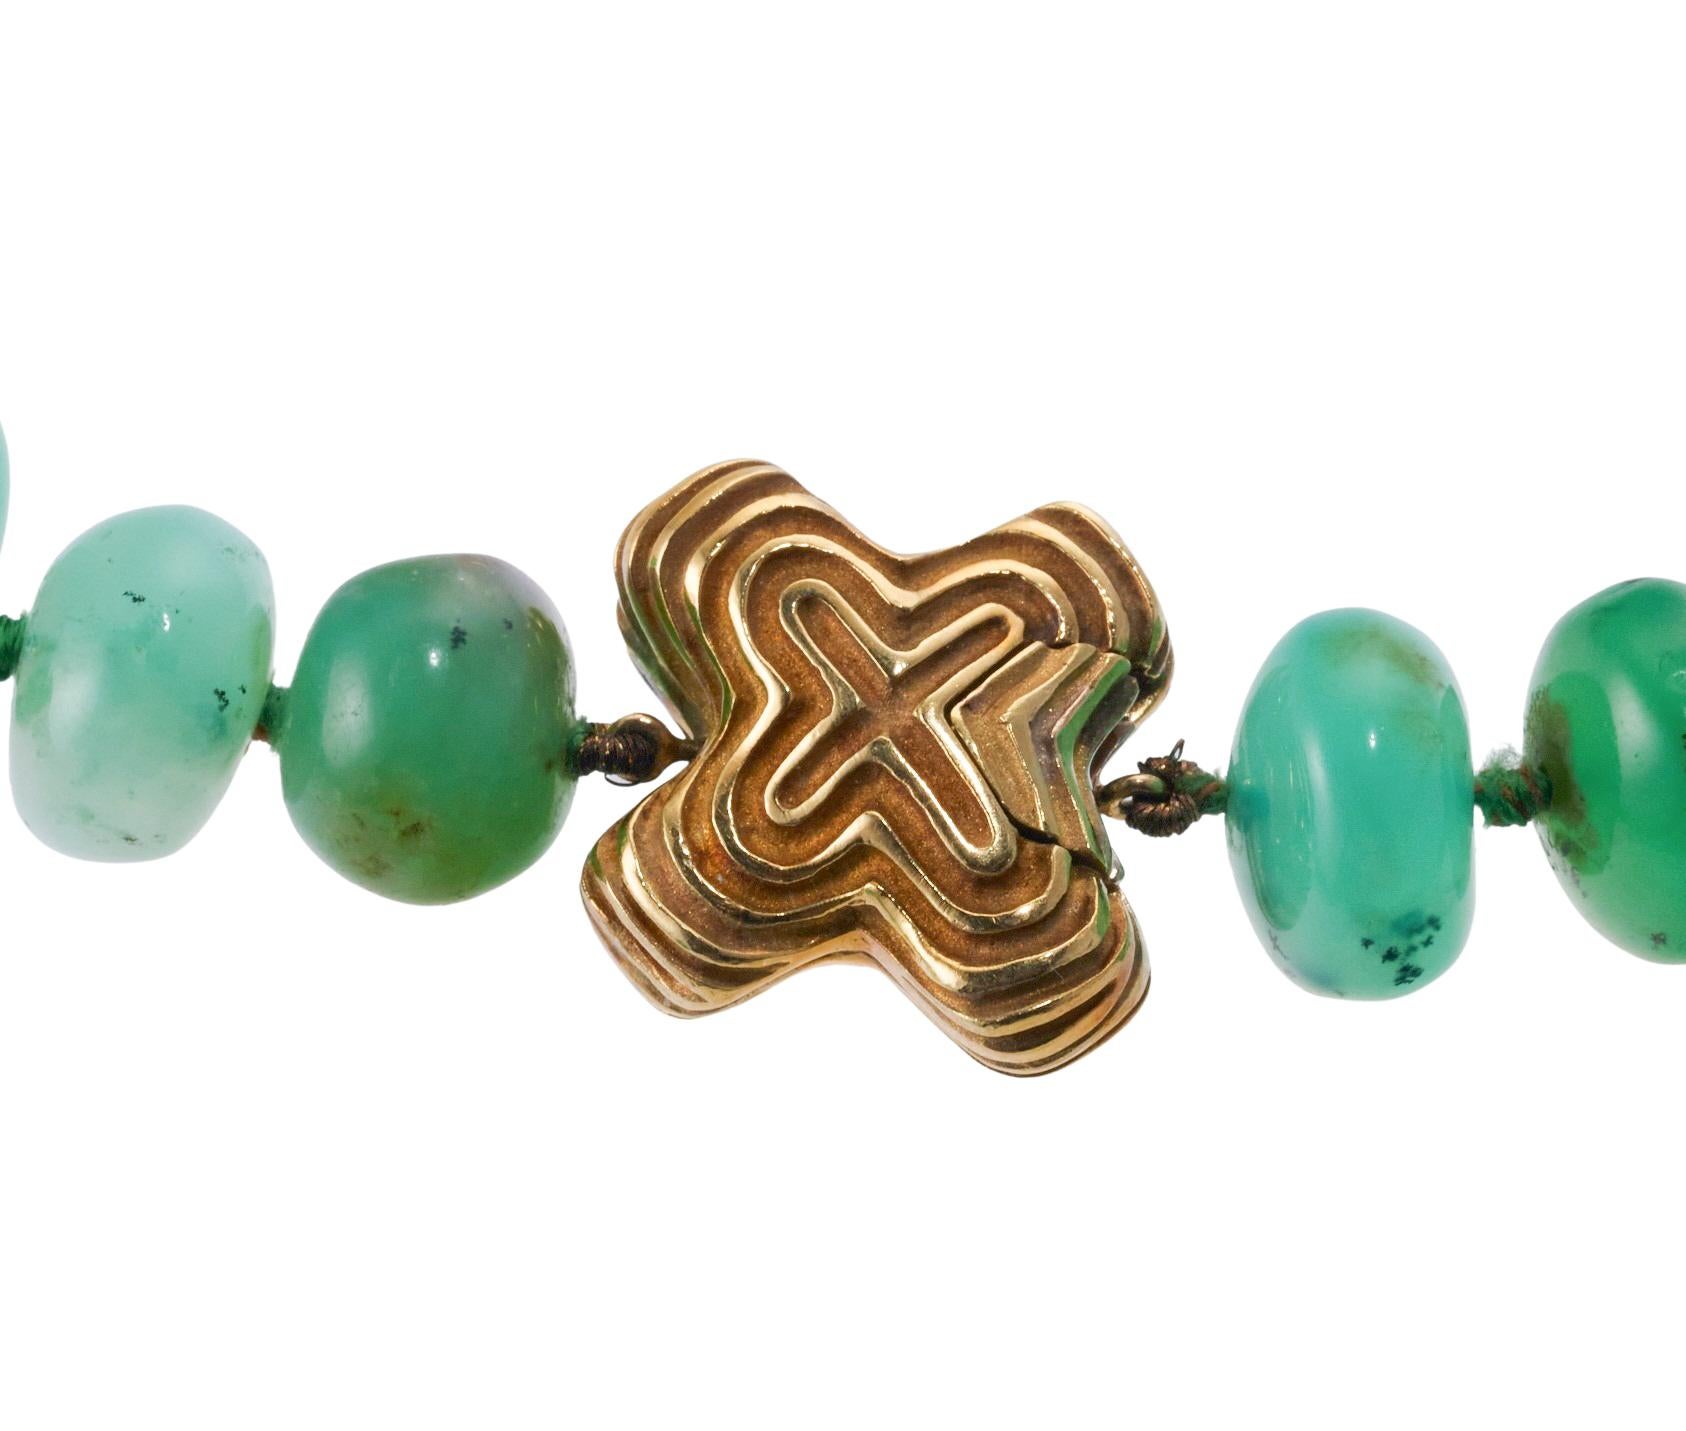 Christopher Walling Aventurine Bead Gold Necklace In Excellent Condition For Sale In Lambertville, NJ